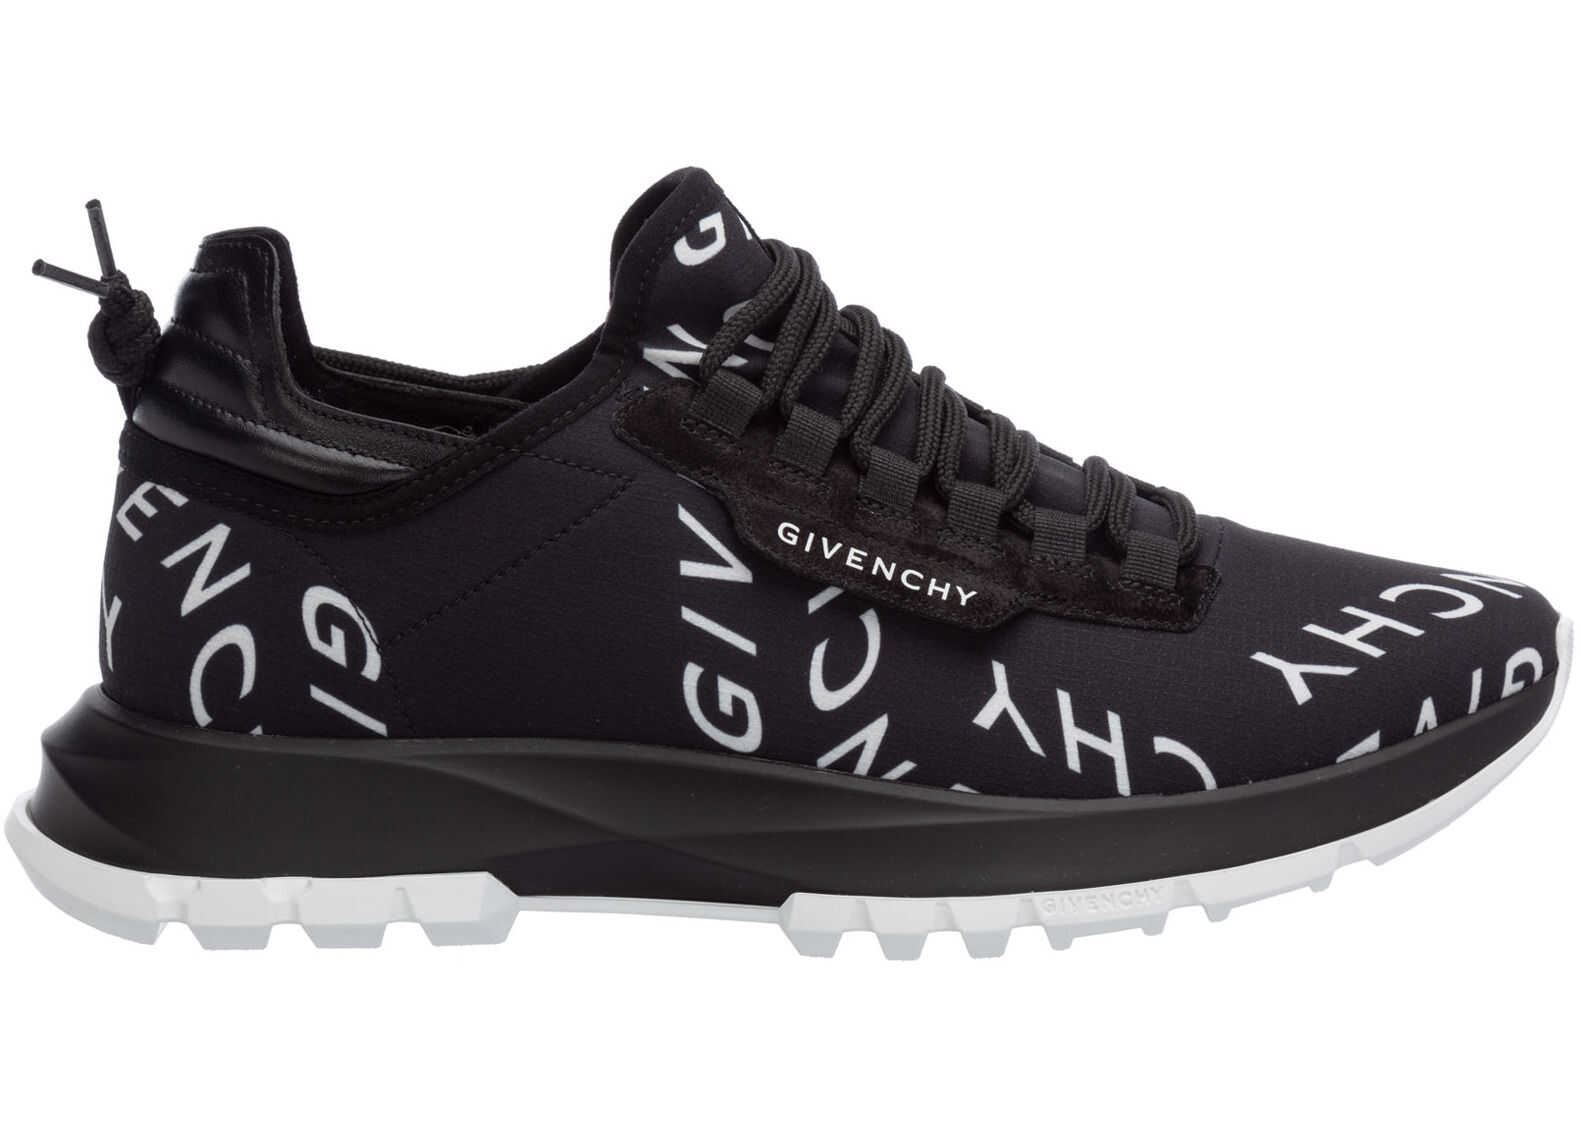 Givenchy Sneakers Spectre* Black